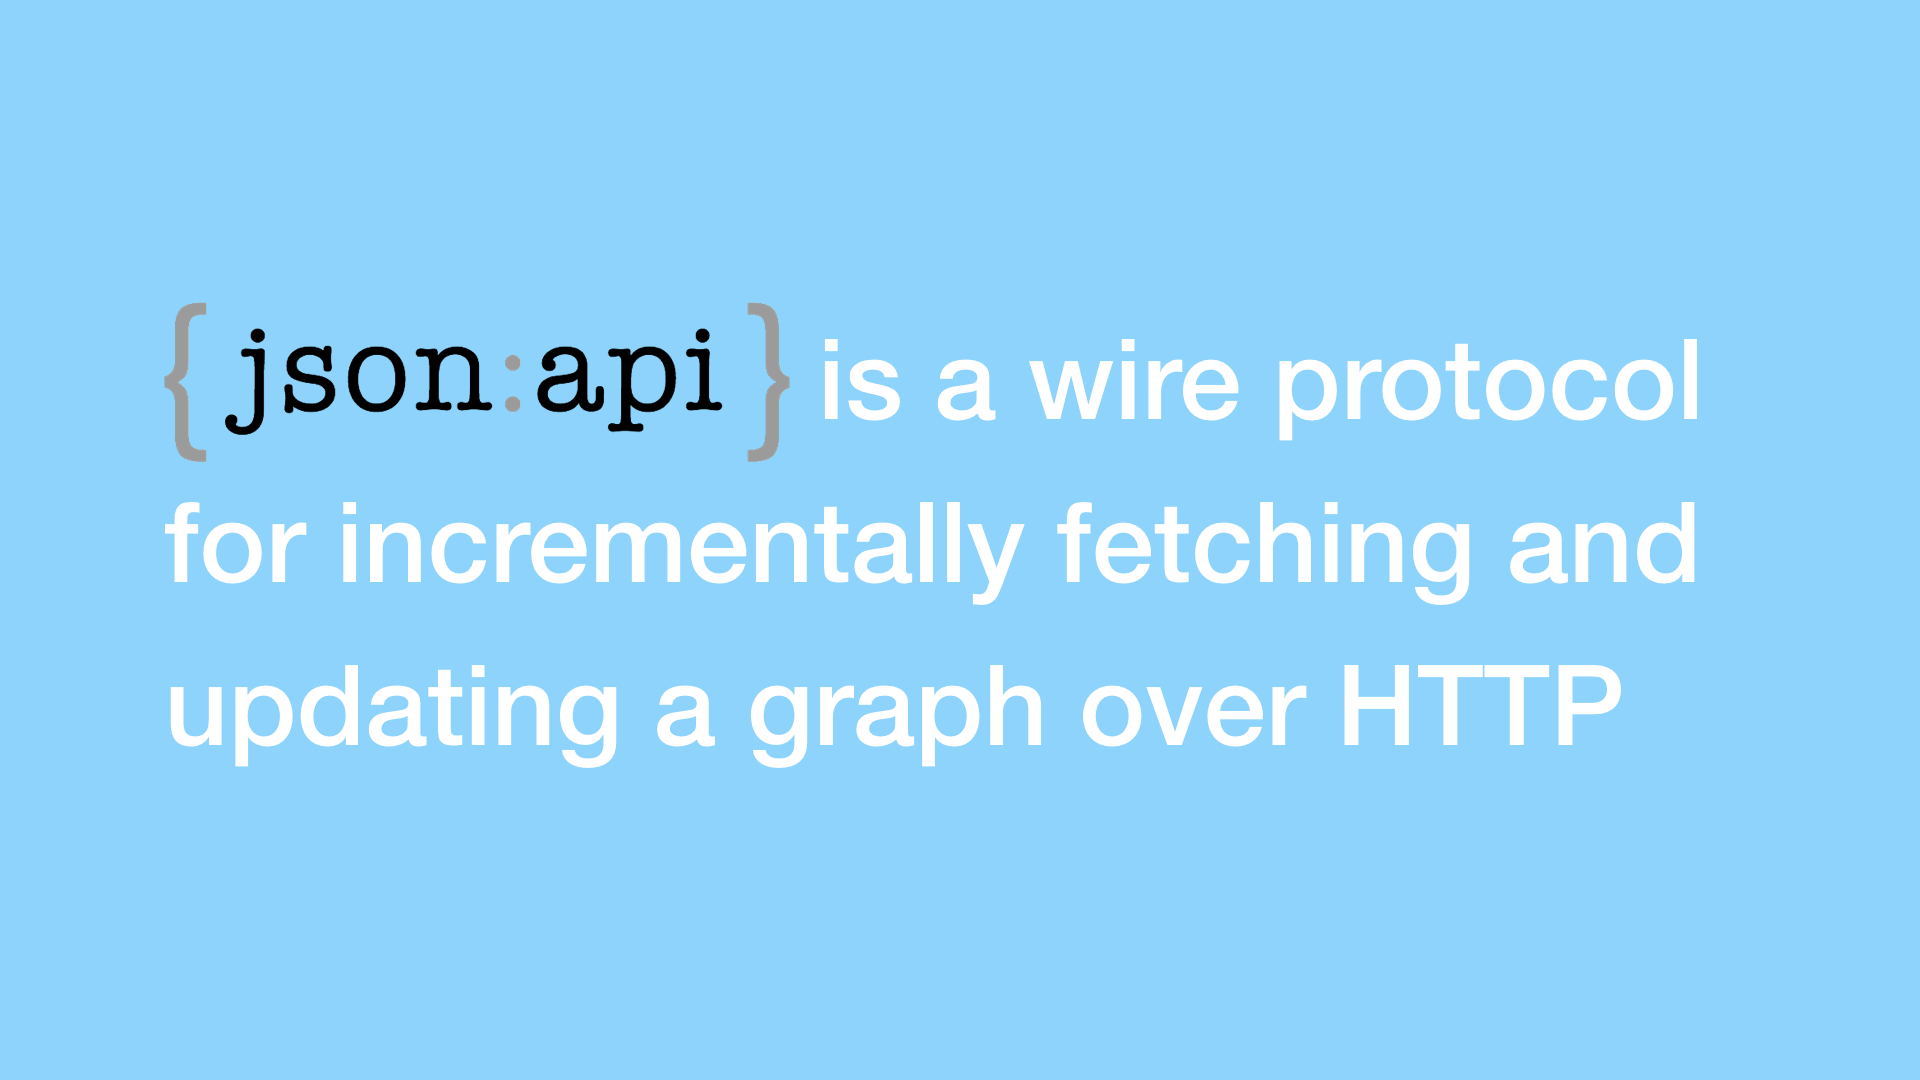 JSON API is a wire protocol for incrementally fetching and updating a graph over HTTP